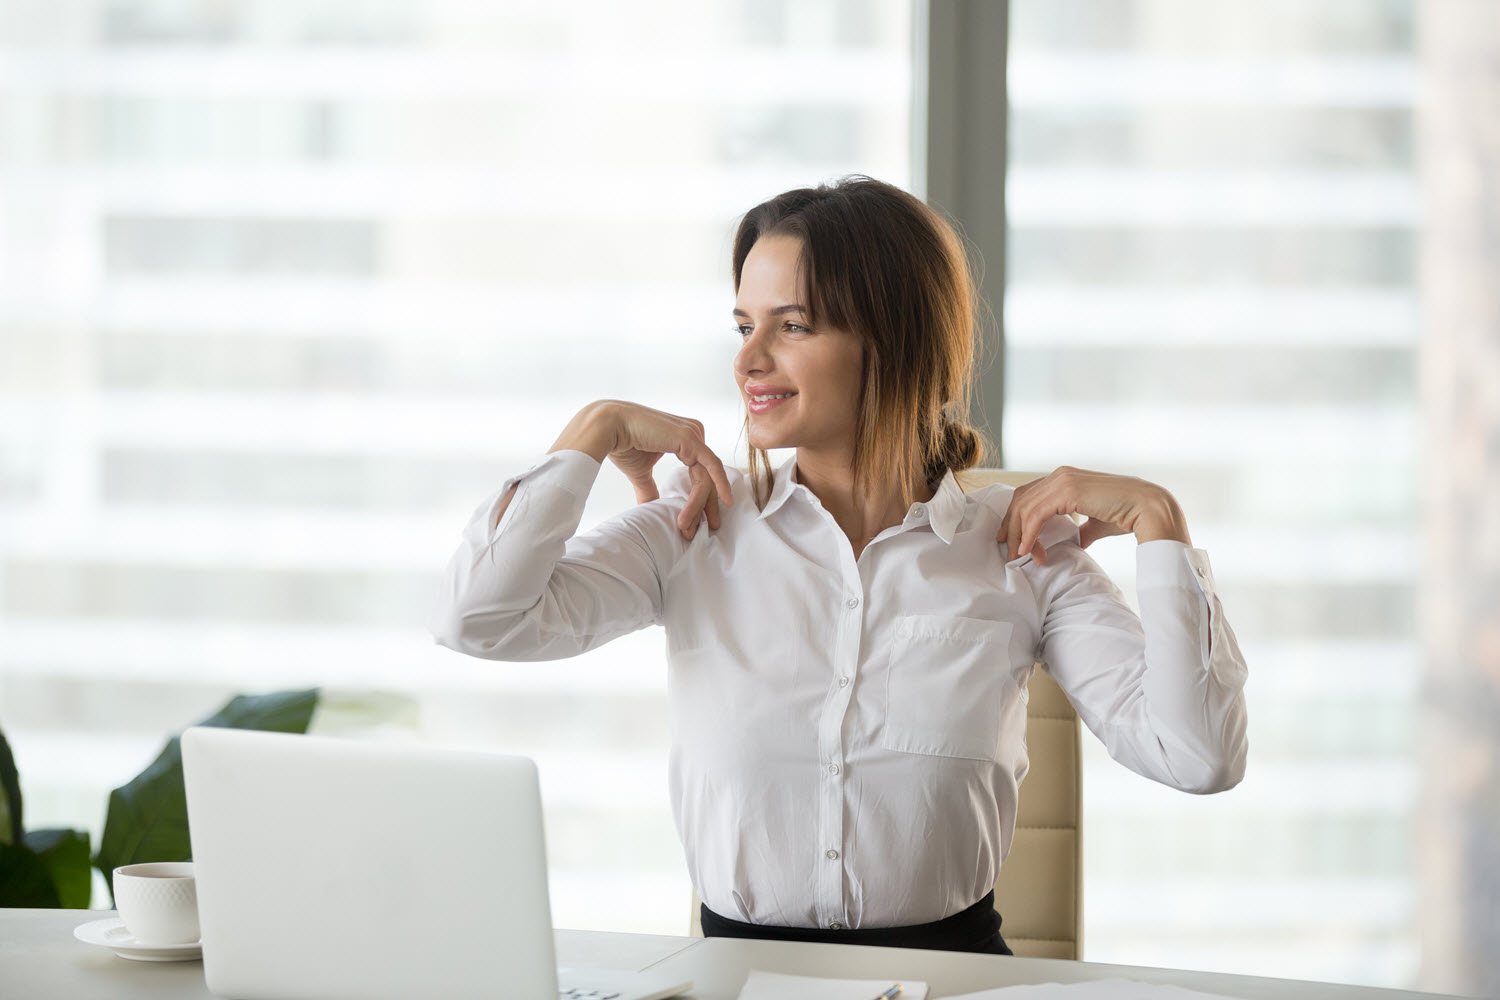 Posture in the Workplace: How to Site Properly and Avoid Long Term Muscle Aches and Pains